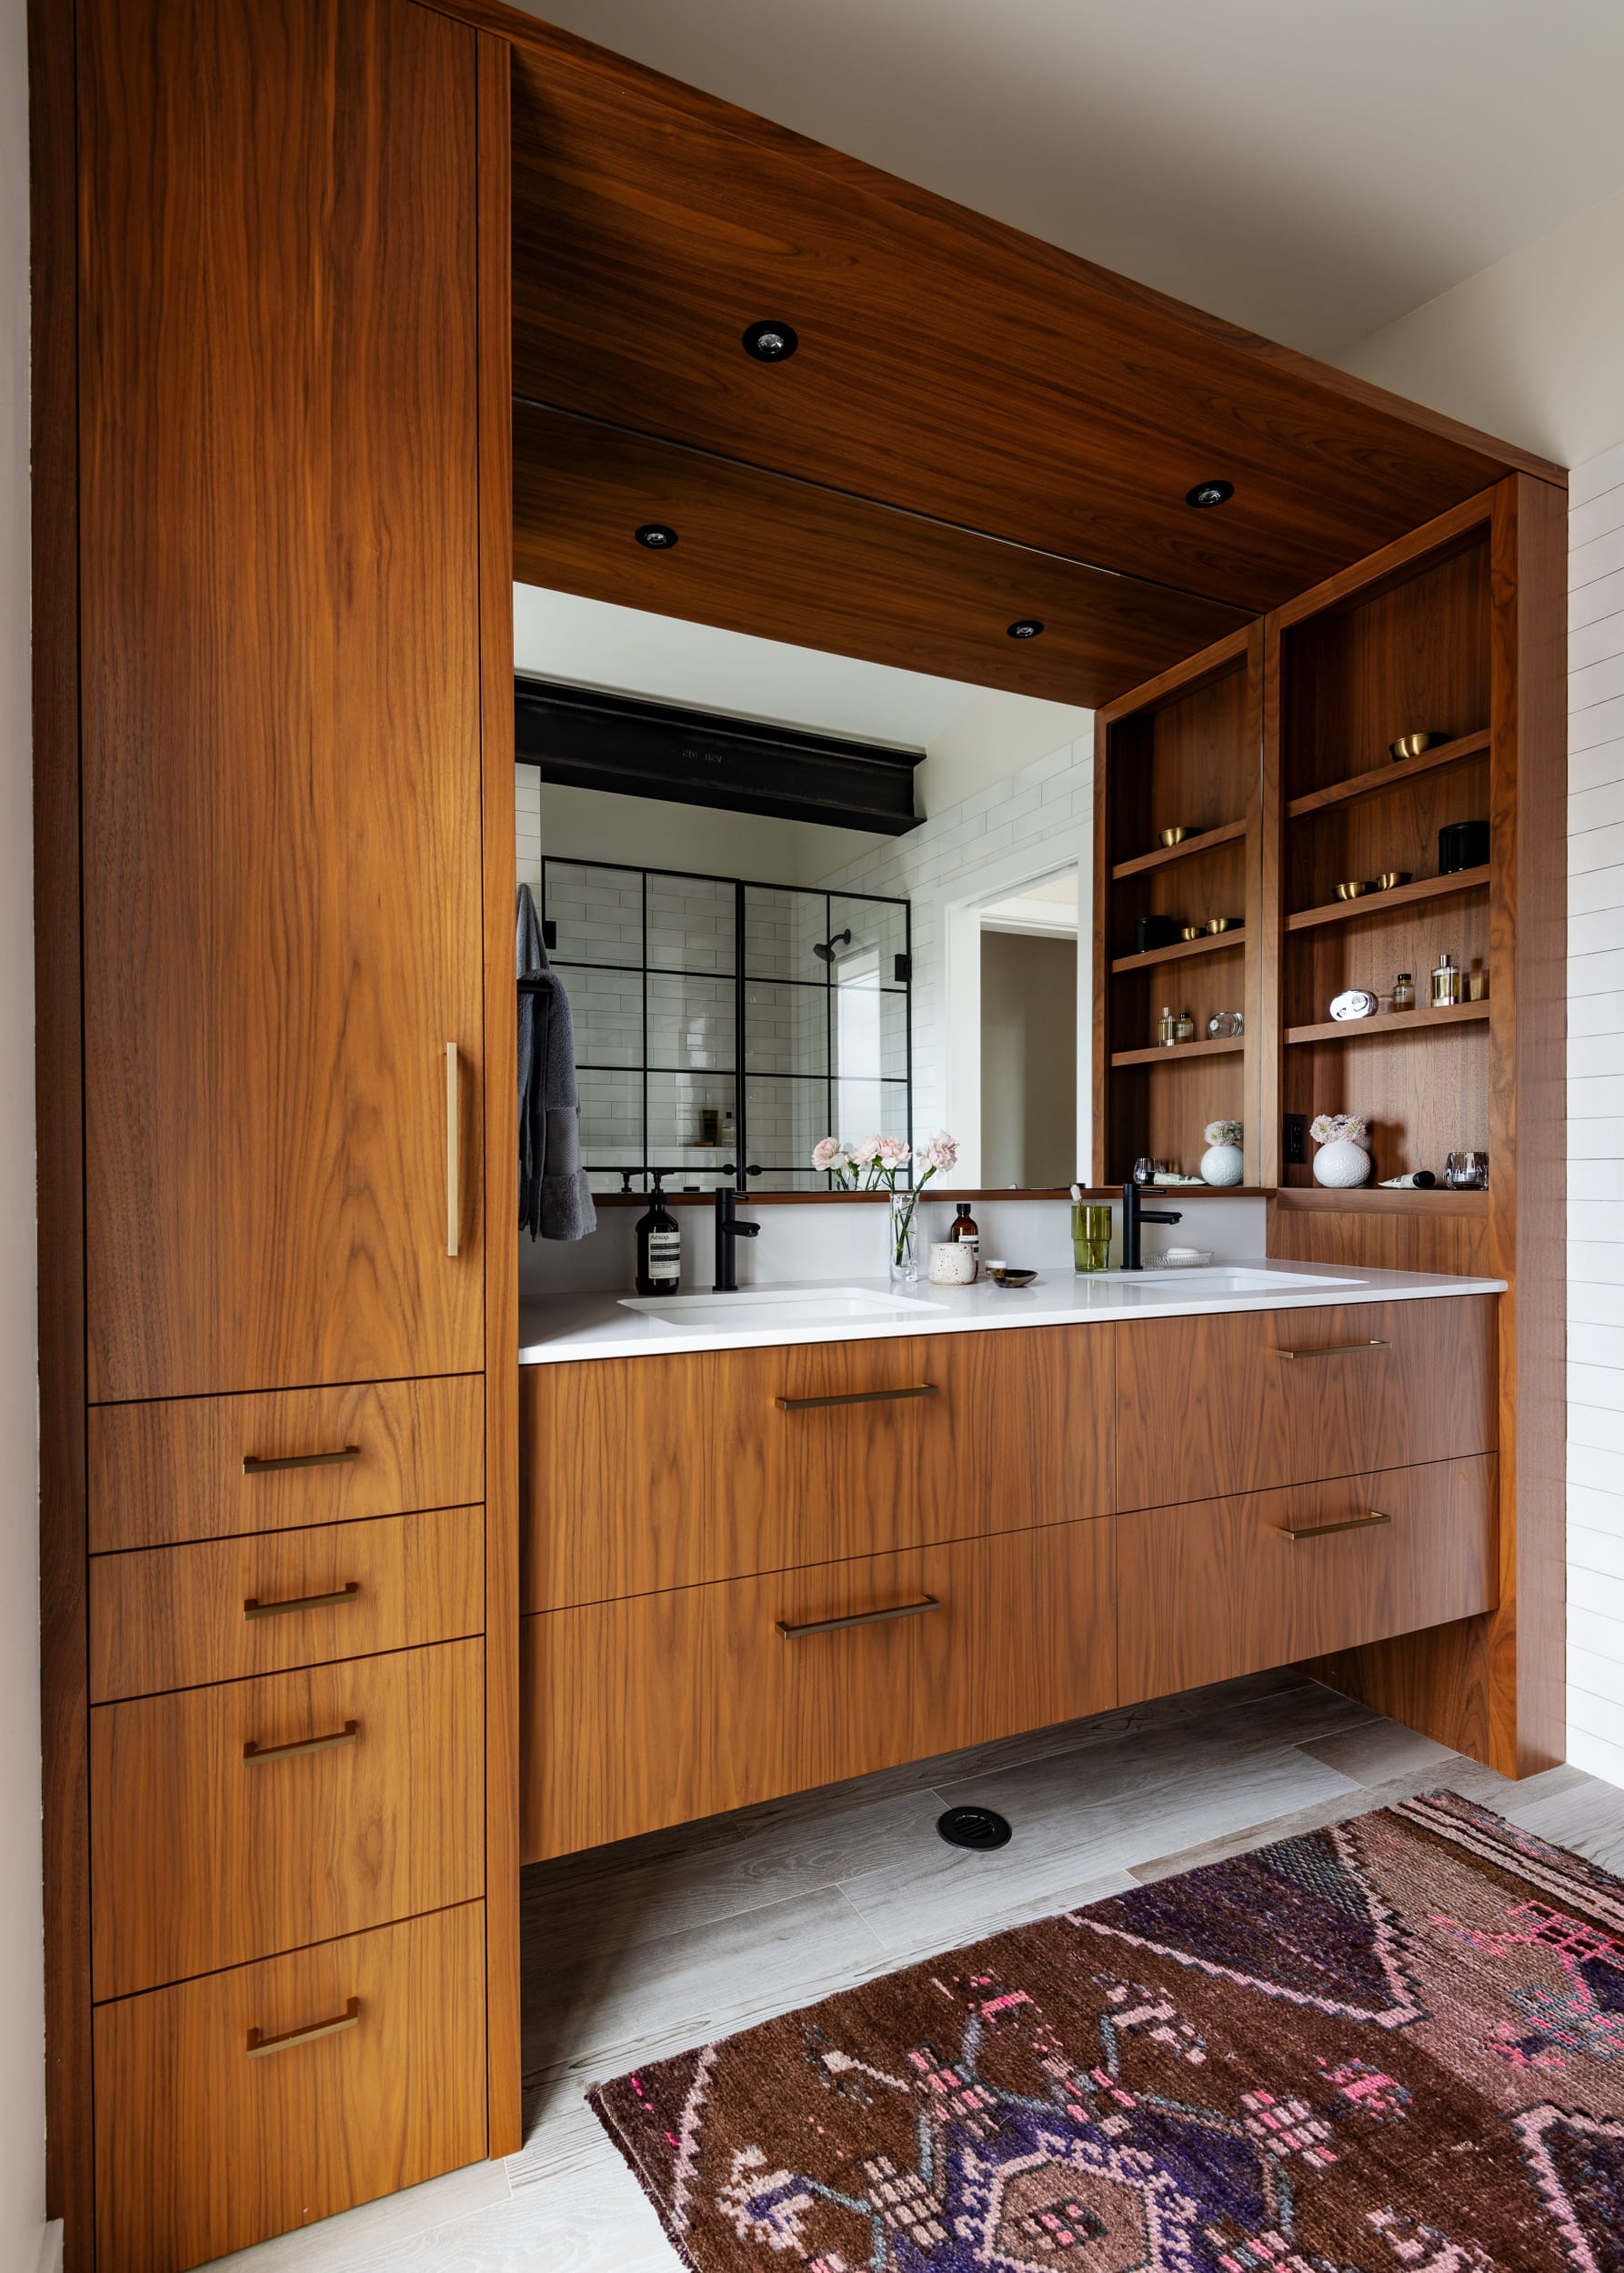 A bathroom with wooden cabinets and a rug.